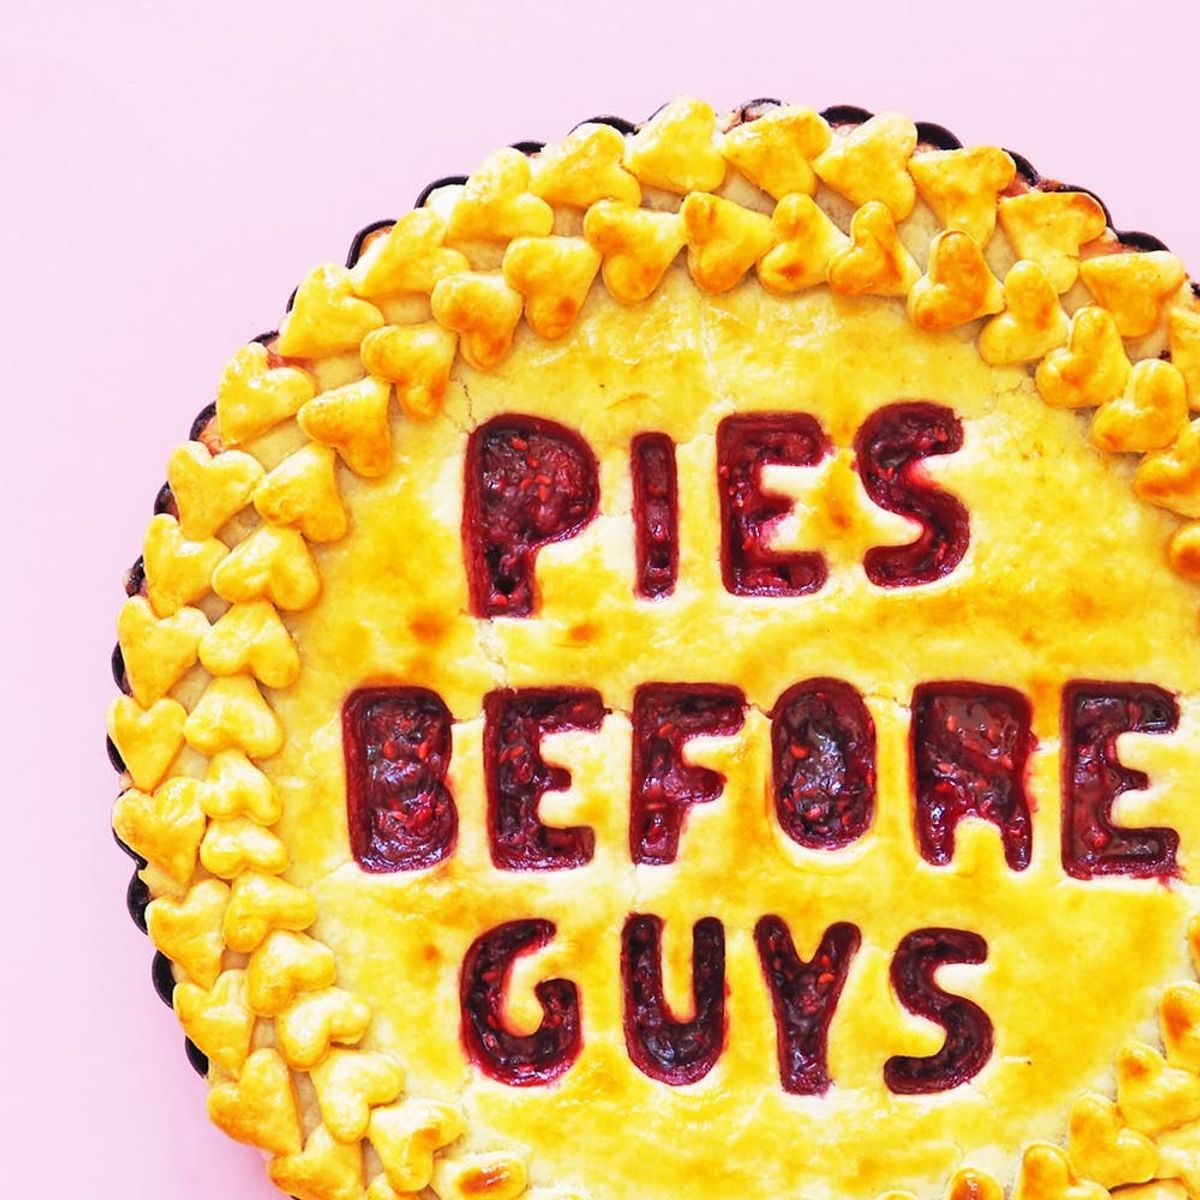 Celebrate Pies Before Guys This Pi Day